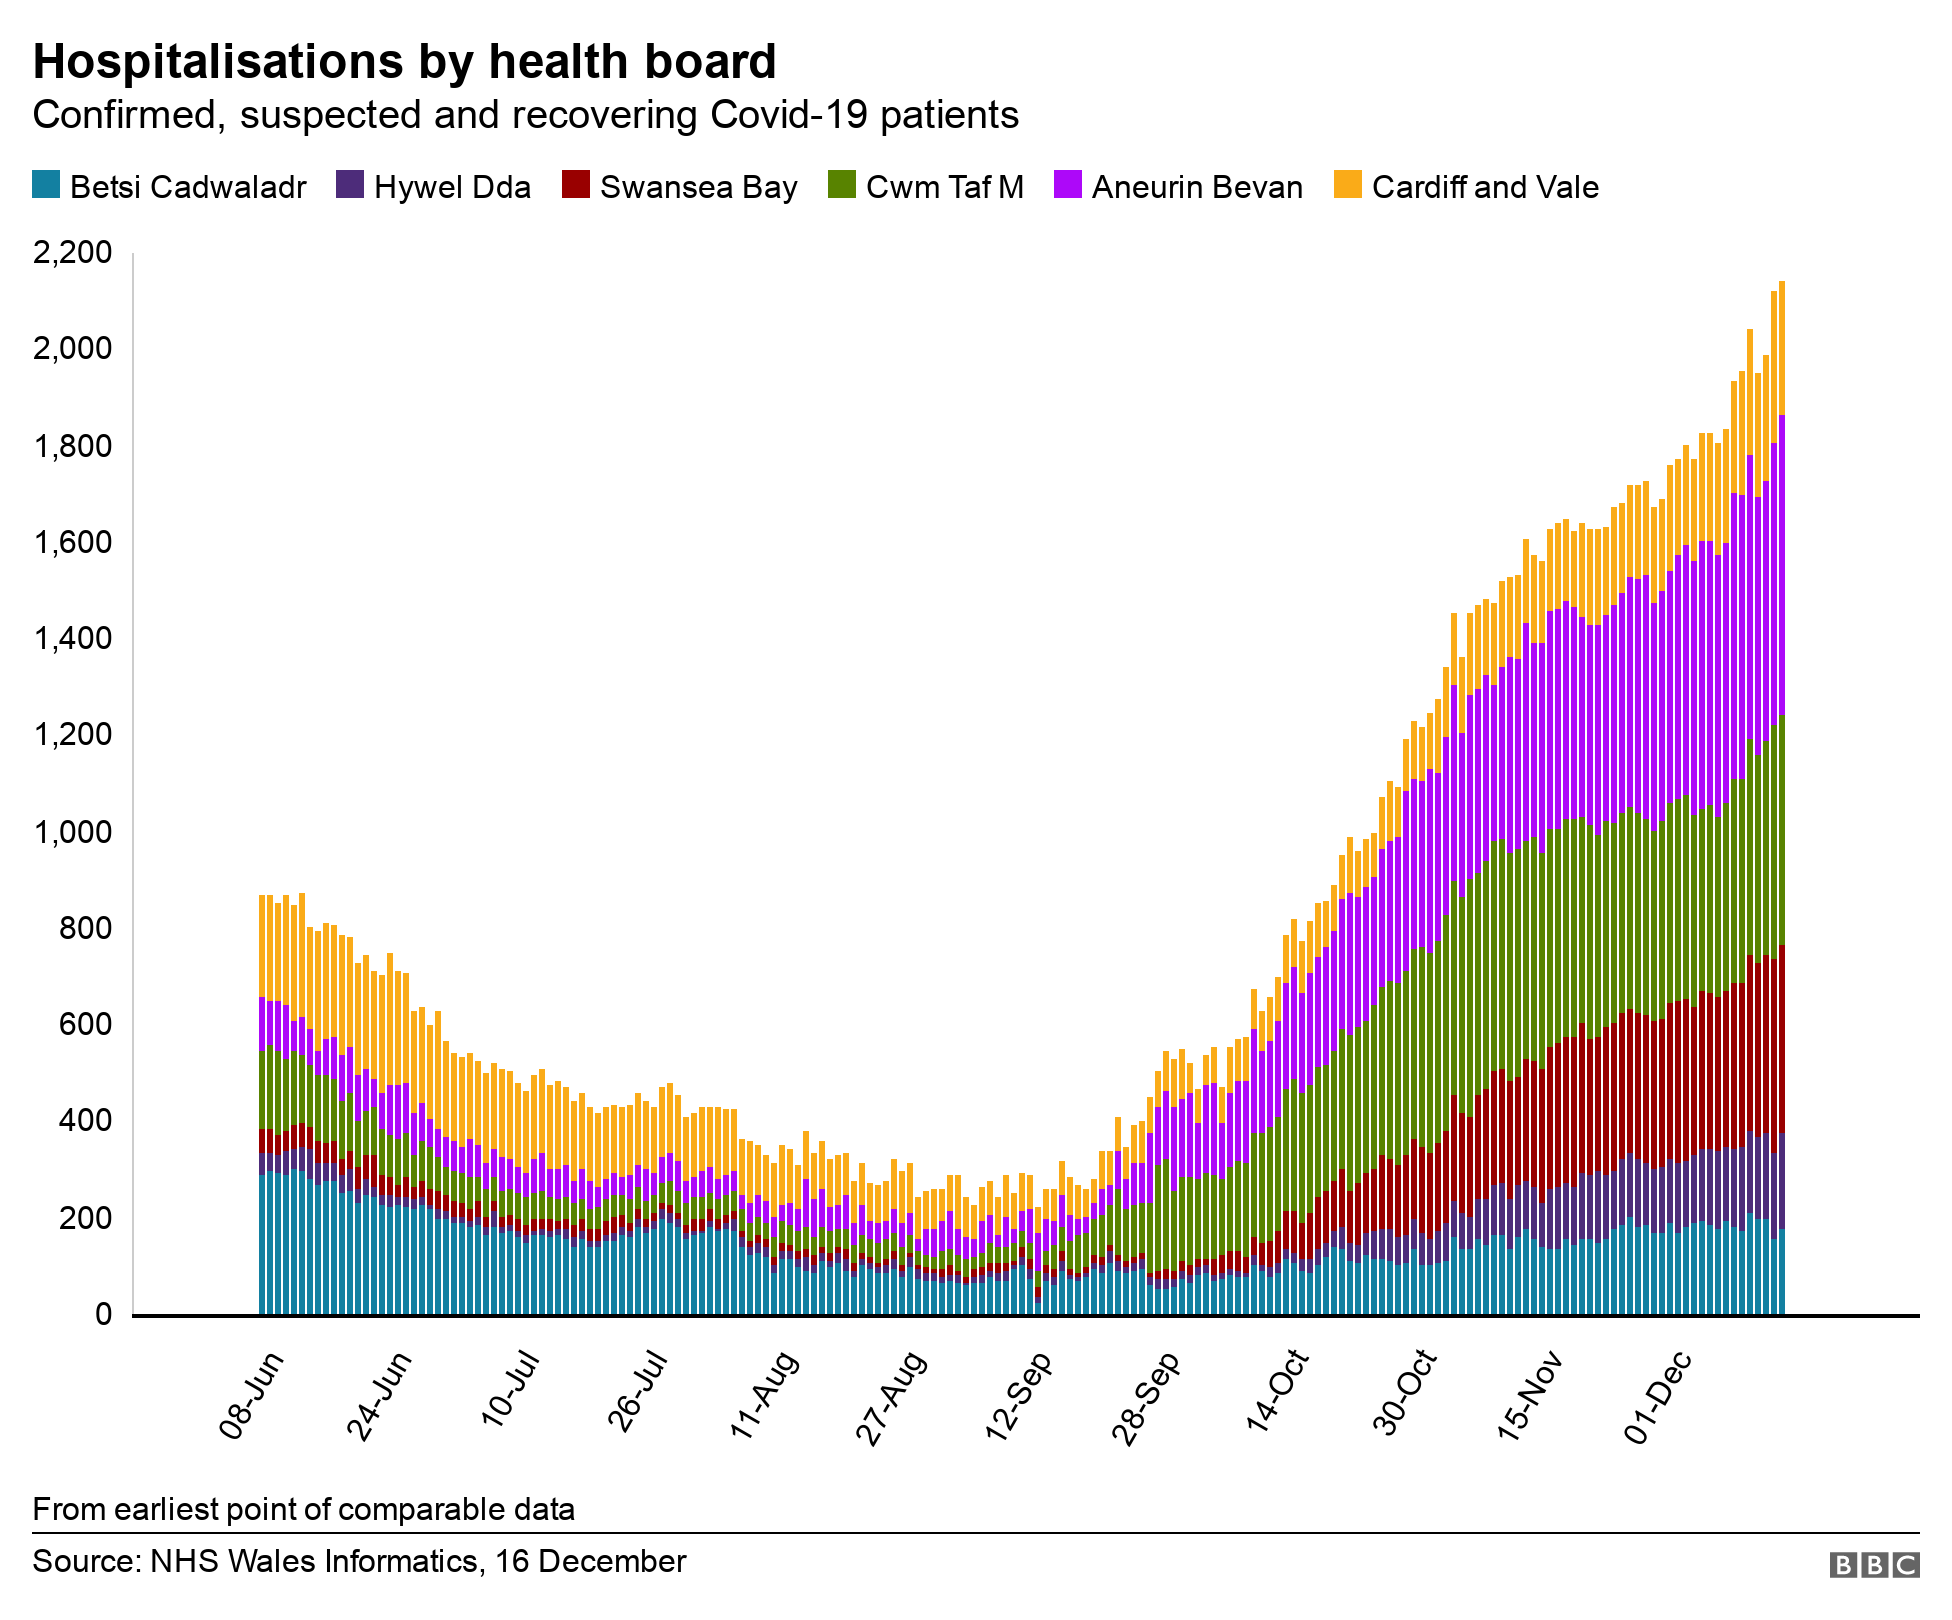 Hospital beds by health board